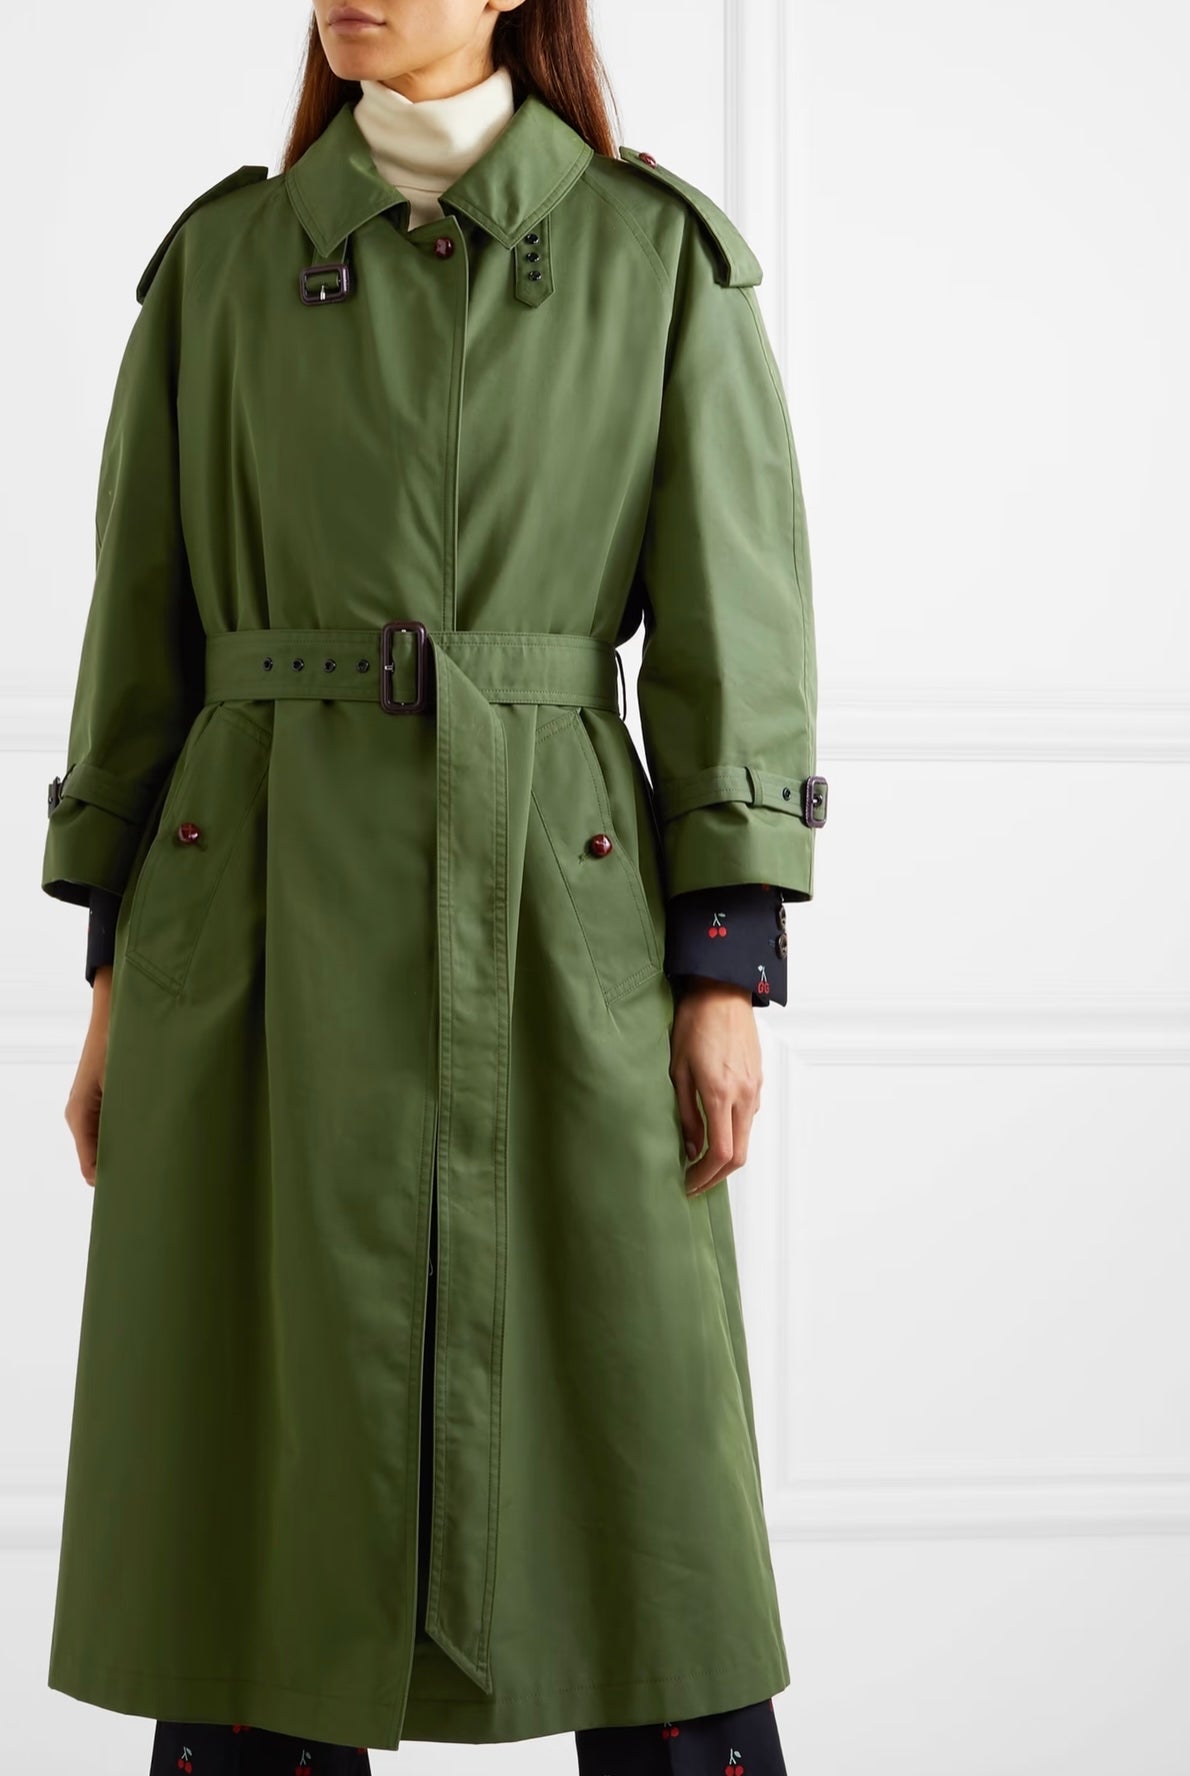 GUCCI - Green Trench Coat